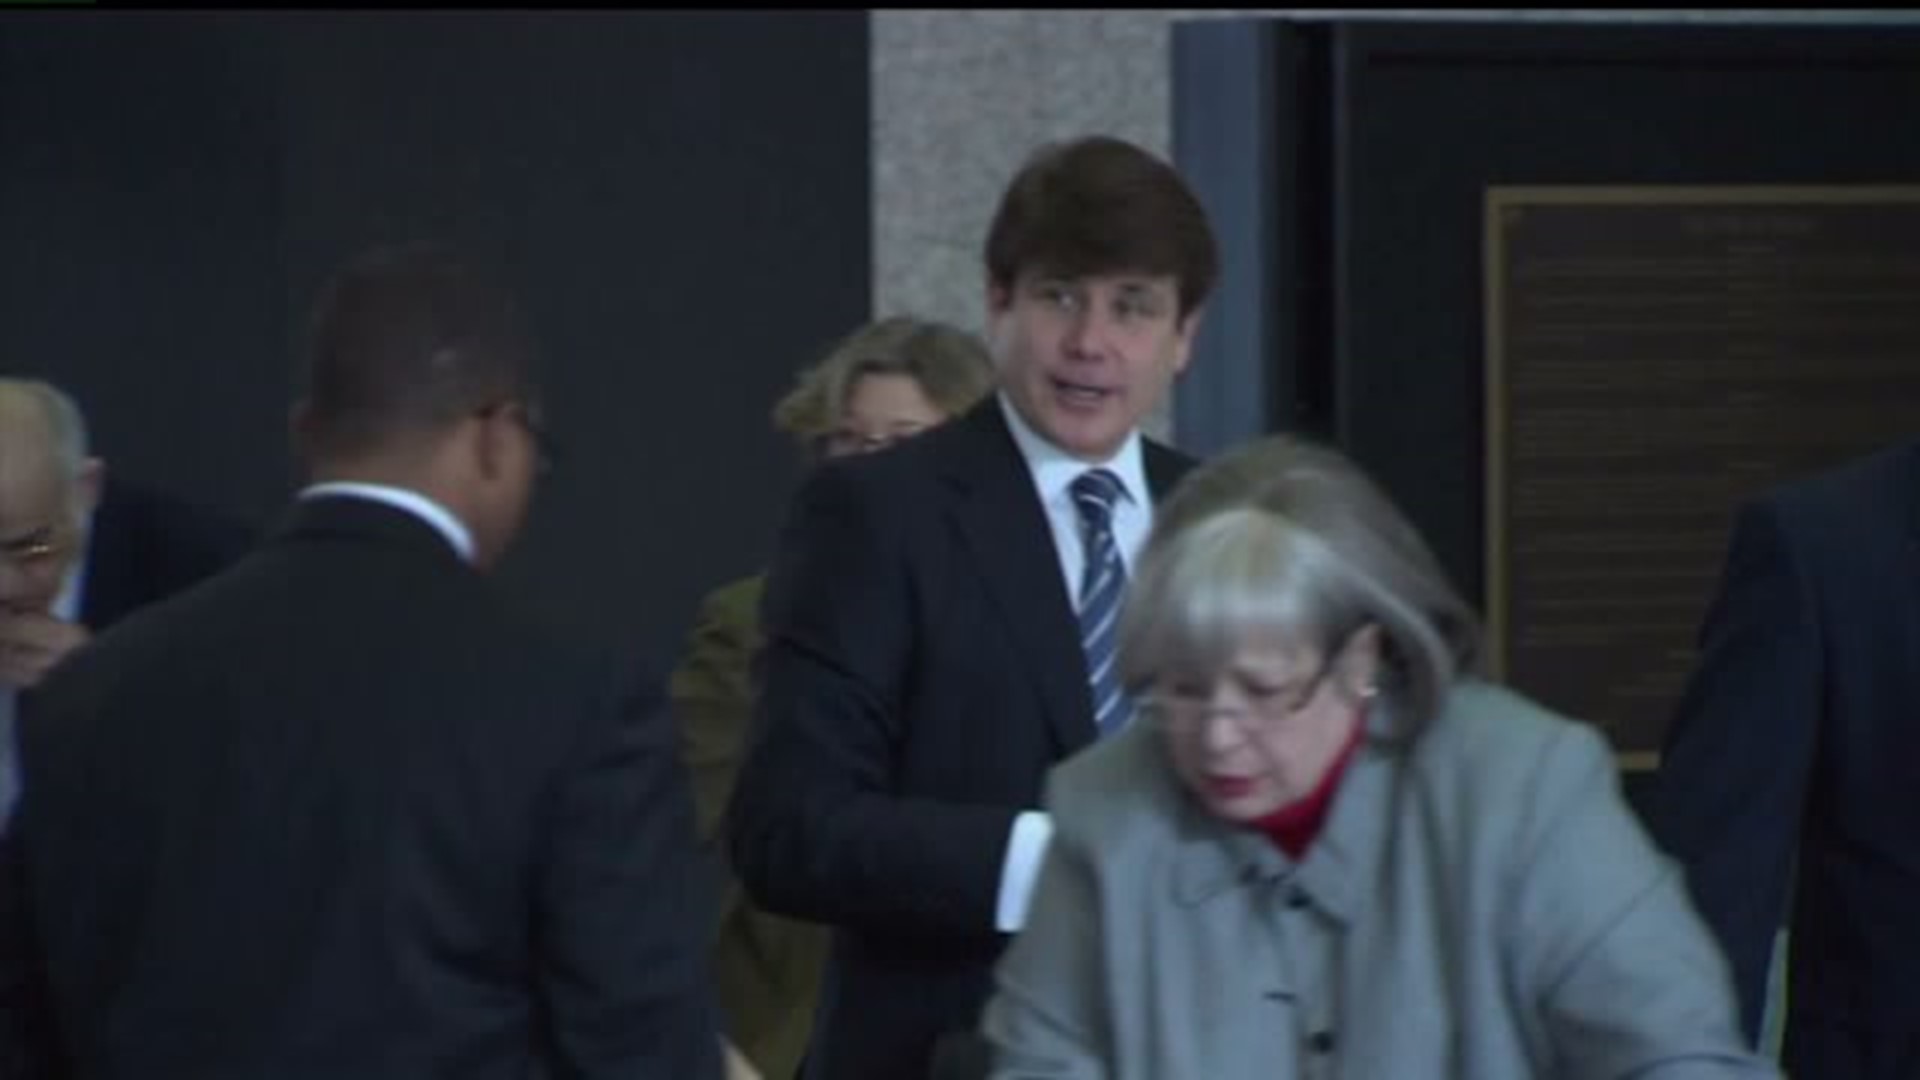 Rod Blagojevich appeal rejected